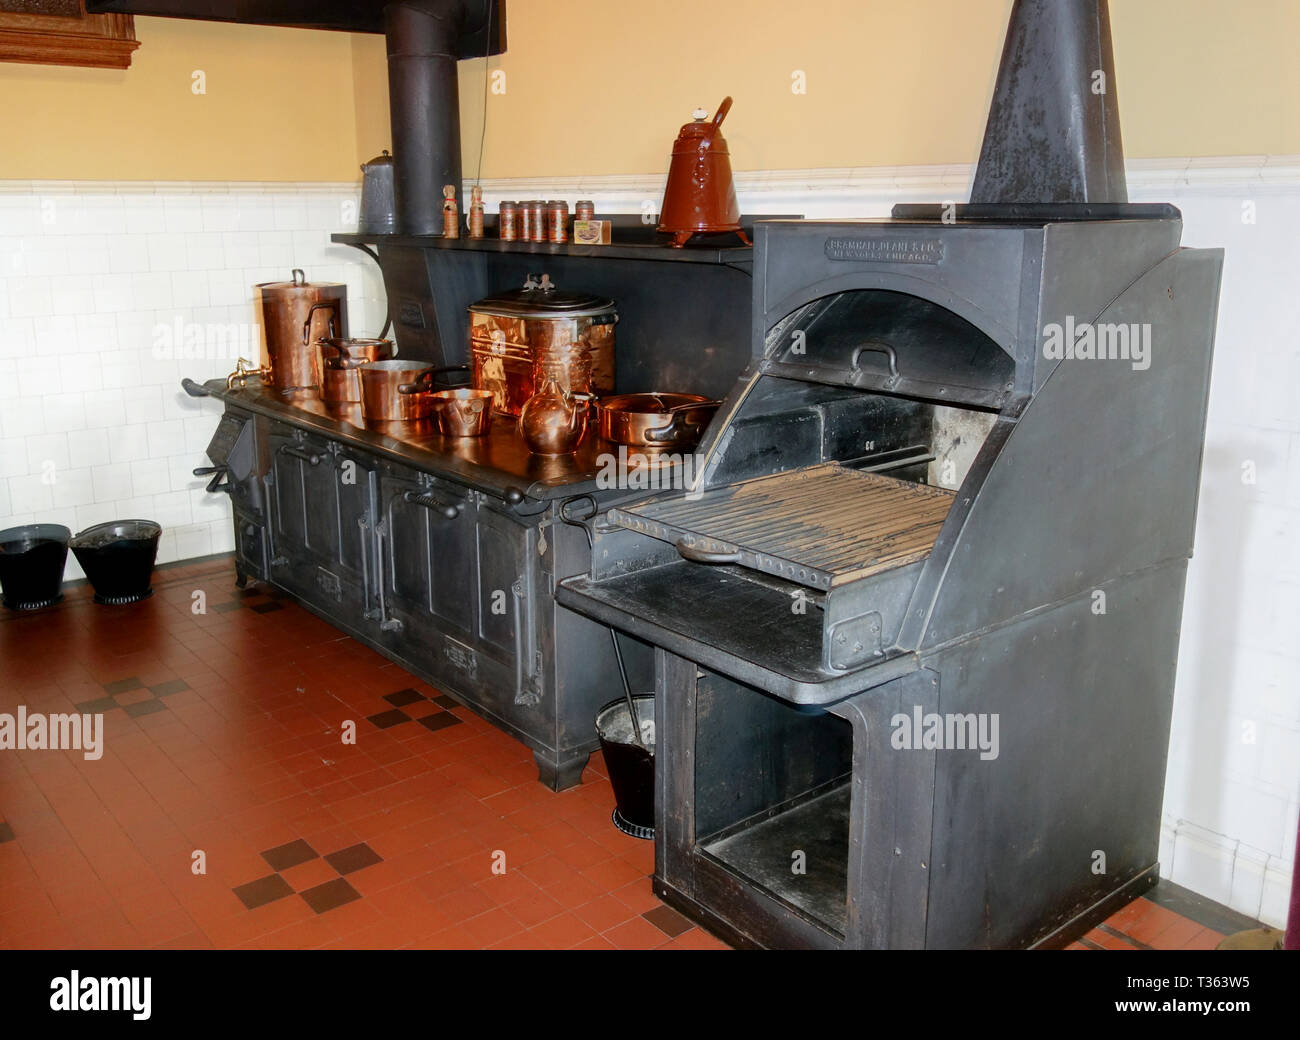 https://c8.alamy.com/comp/T363W5/stove-grill-ovens-and-copper-pans-in-the-kitchen-of-biltmore-house-asheville-north-carolina-us-2017-T363W5.jpg